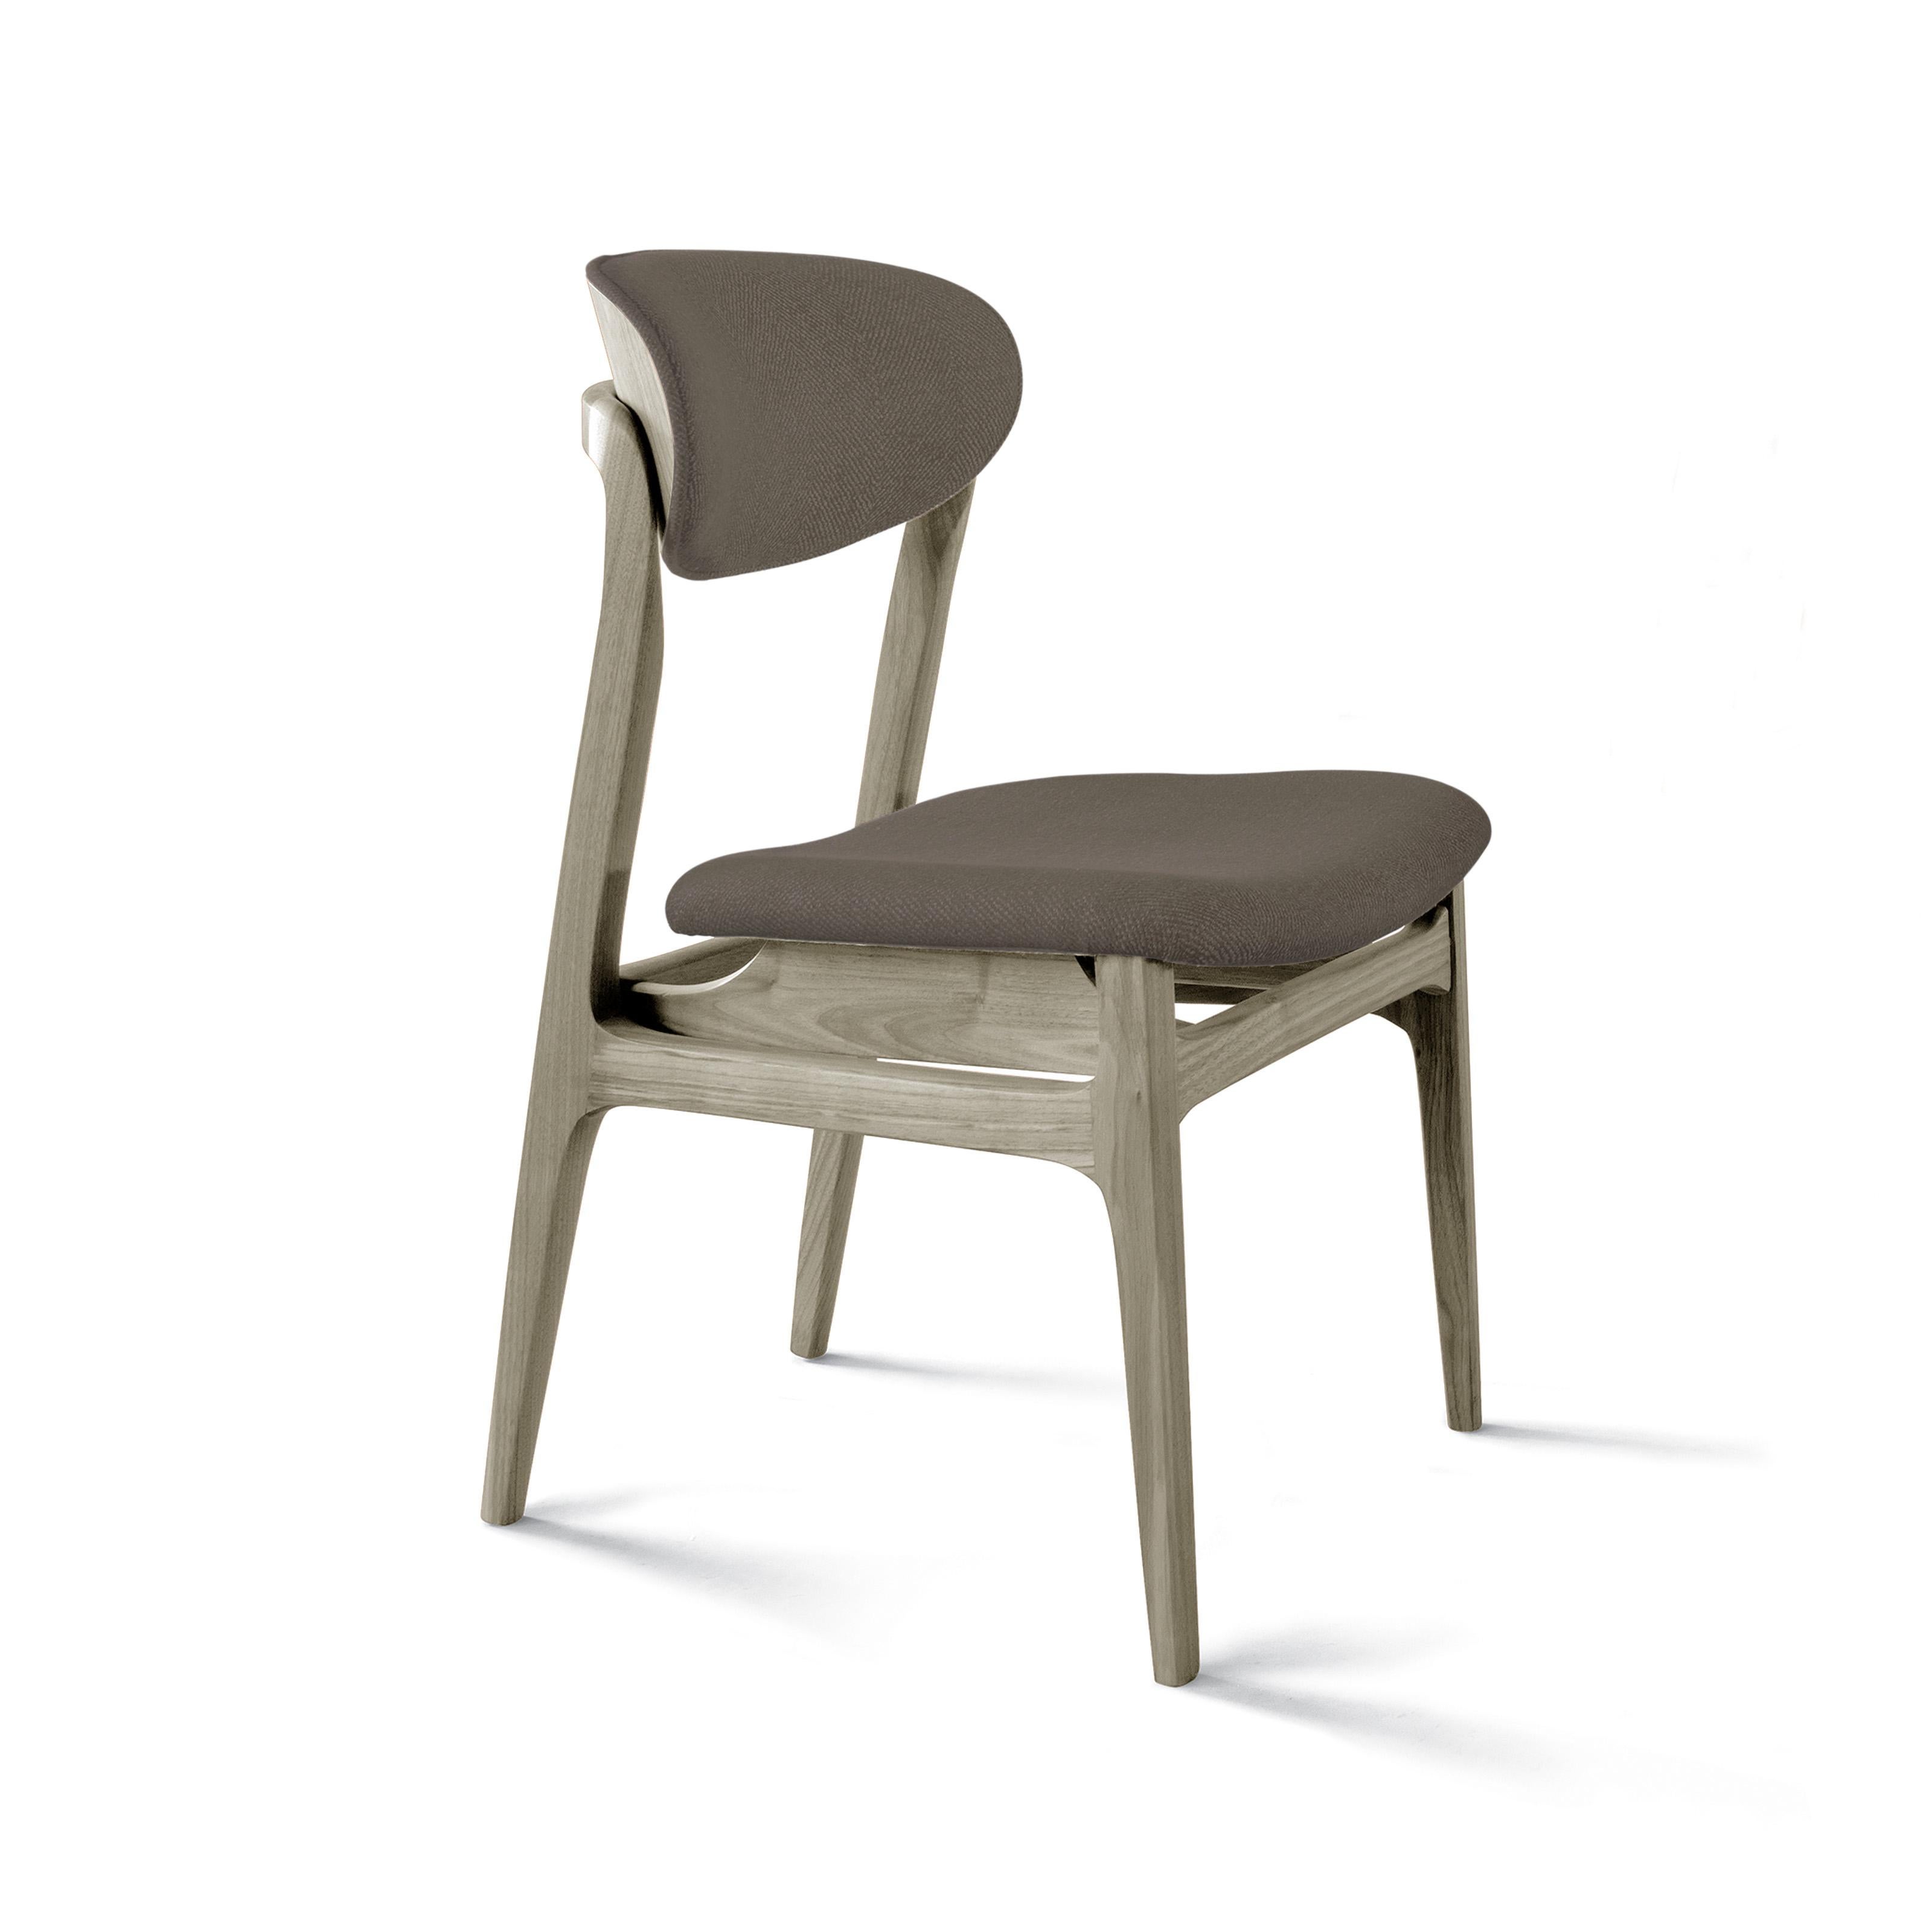 Italian Agio Solid Wood Chair, Walnut in Hand-Made Natural Grey Finish, Contemporary For Sale